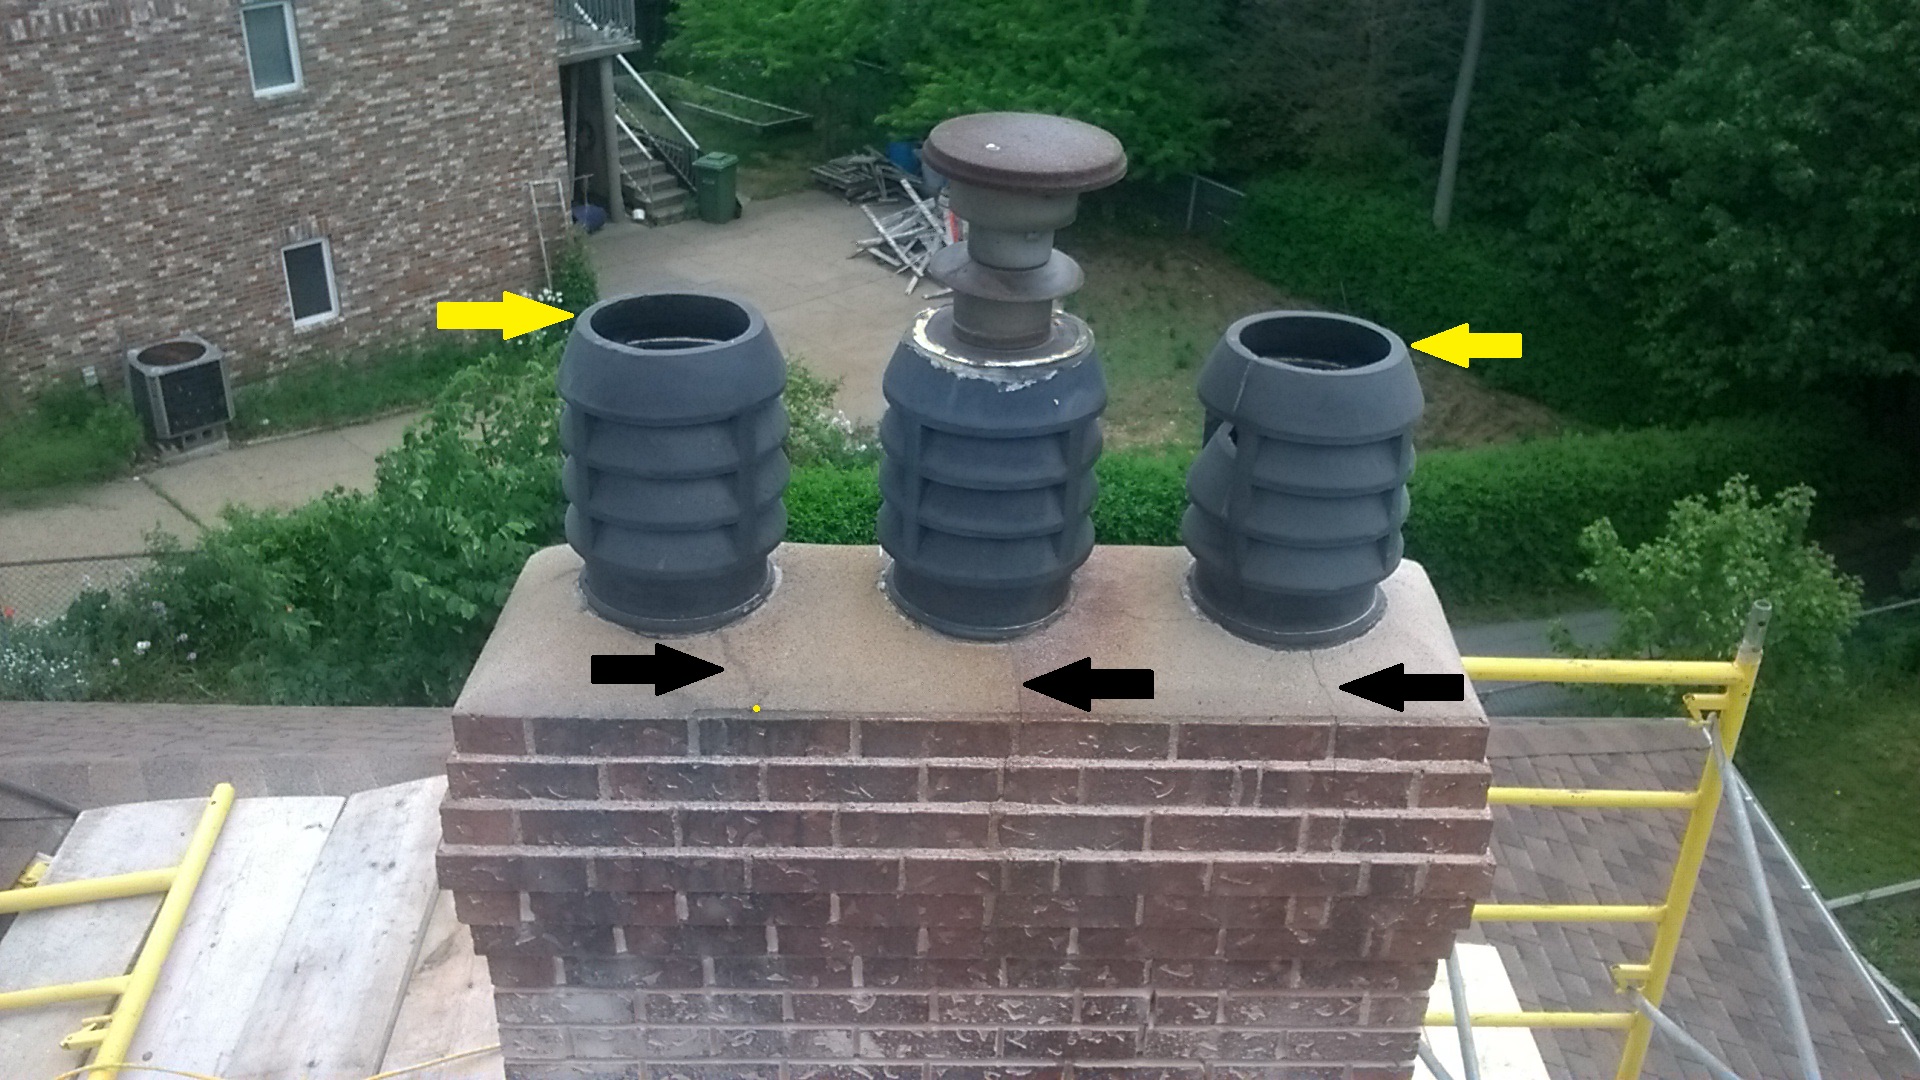 image of chimney-chimney repair services completed in Halifax-Dartmouth Regional Municipality, NS by Pro Chimney Services based in Halifax NS servicing all of the Halifax-Dartmouth Regional Municipality, Bedford, Sackville, Mount Uniacke, Windsor, Hantsport, Wolfville, Kentville, Chester, Mahone Bay, Lunenburg, Bridgewater, Liverpool, Fall River, Wellington, Enfield, Elmsdale, Brookfield, Truro, Musquodoboit Harbour & surrounding areas.